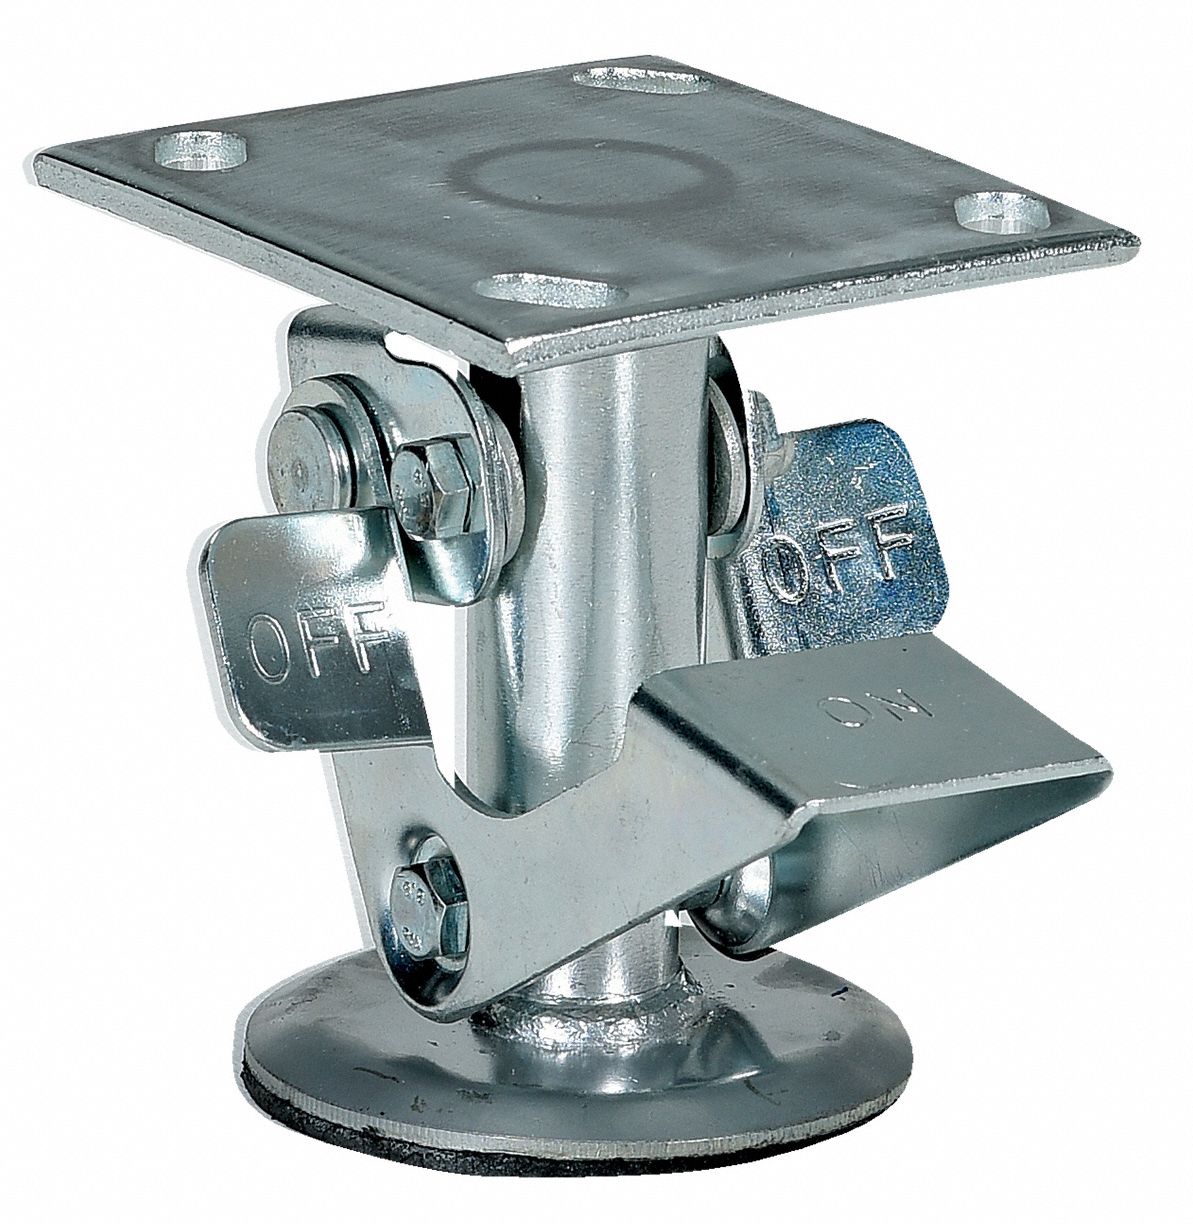 Steel,Abrasion-Resistant Nonmarking Floor Lock 3 5/8 in to 4 1/4 in fit Caster Mounting Height,2041004306 